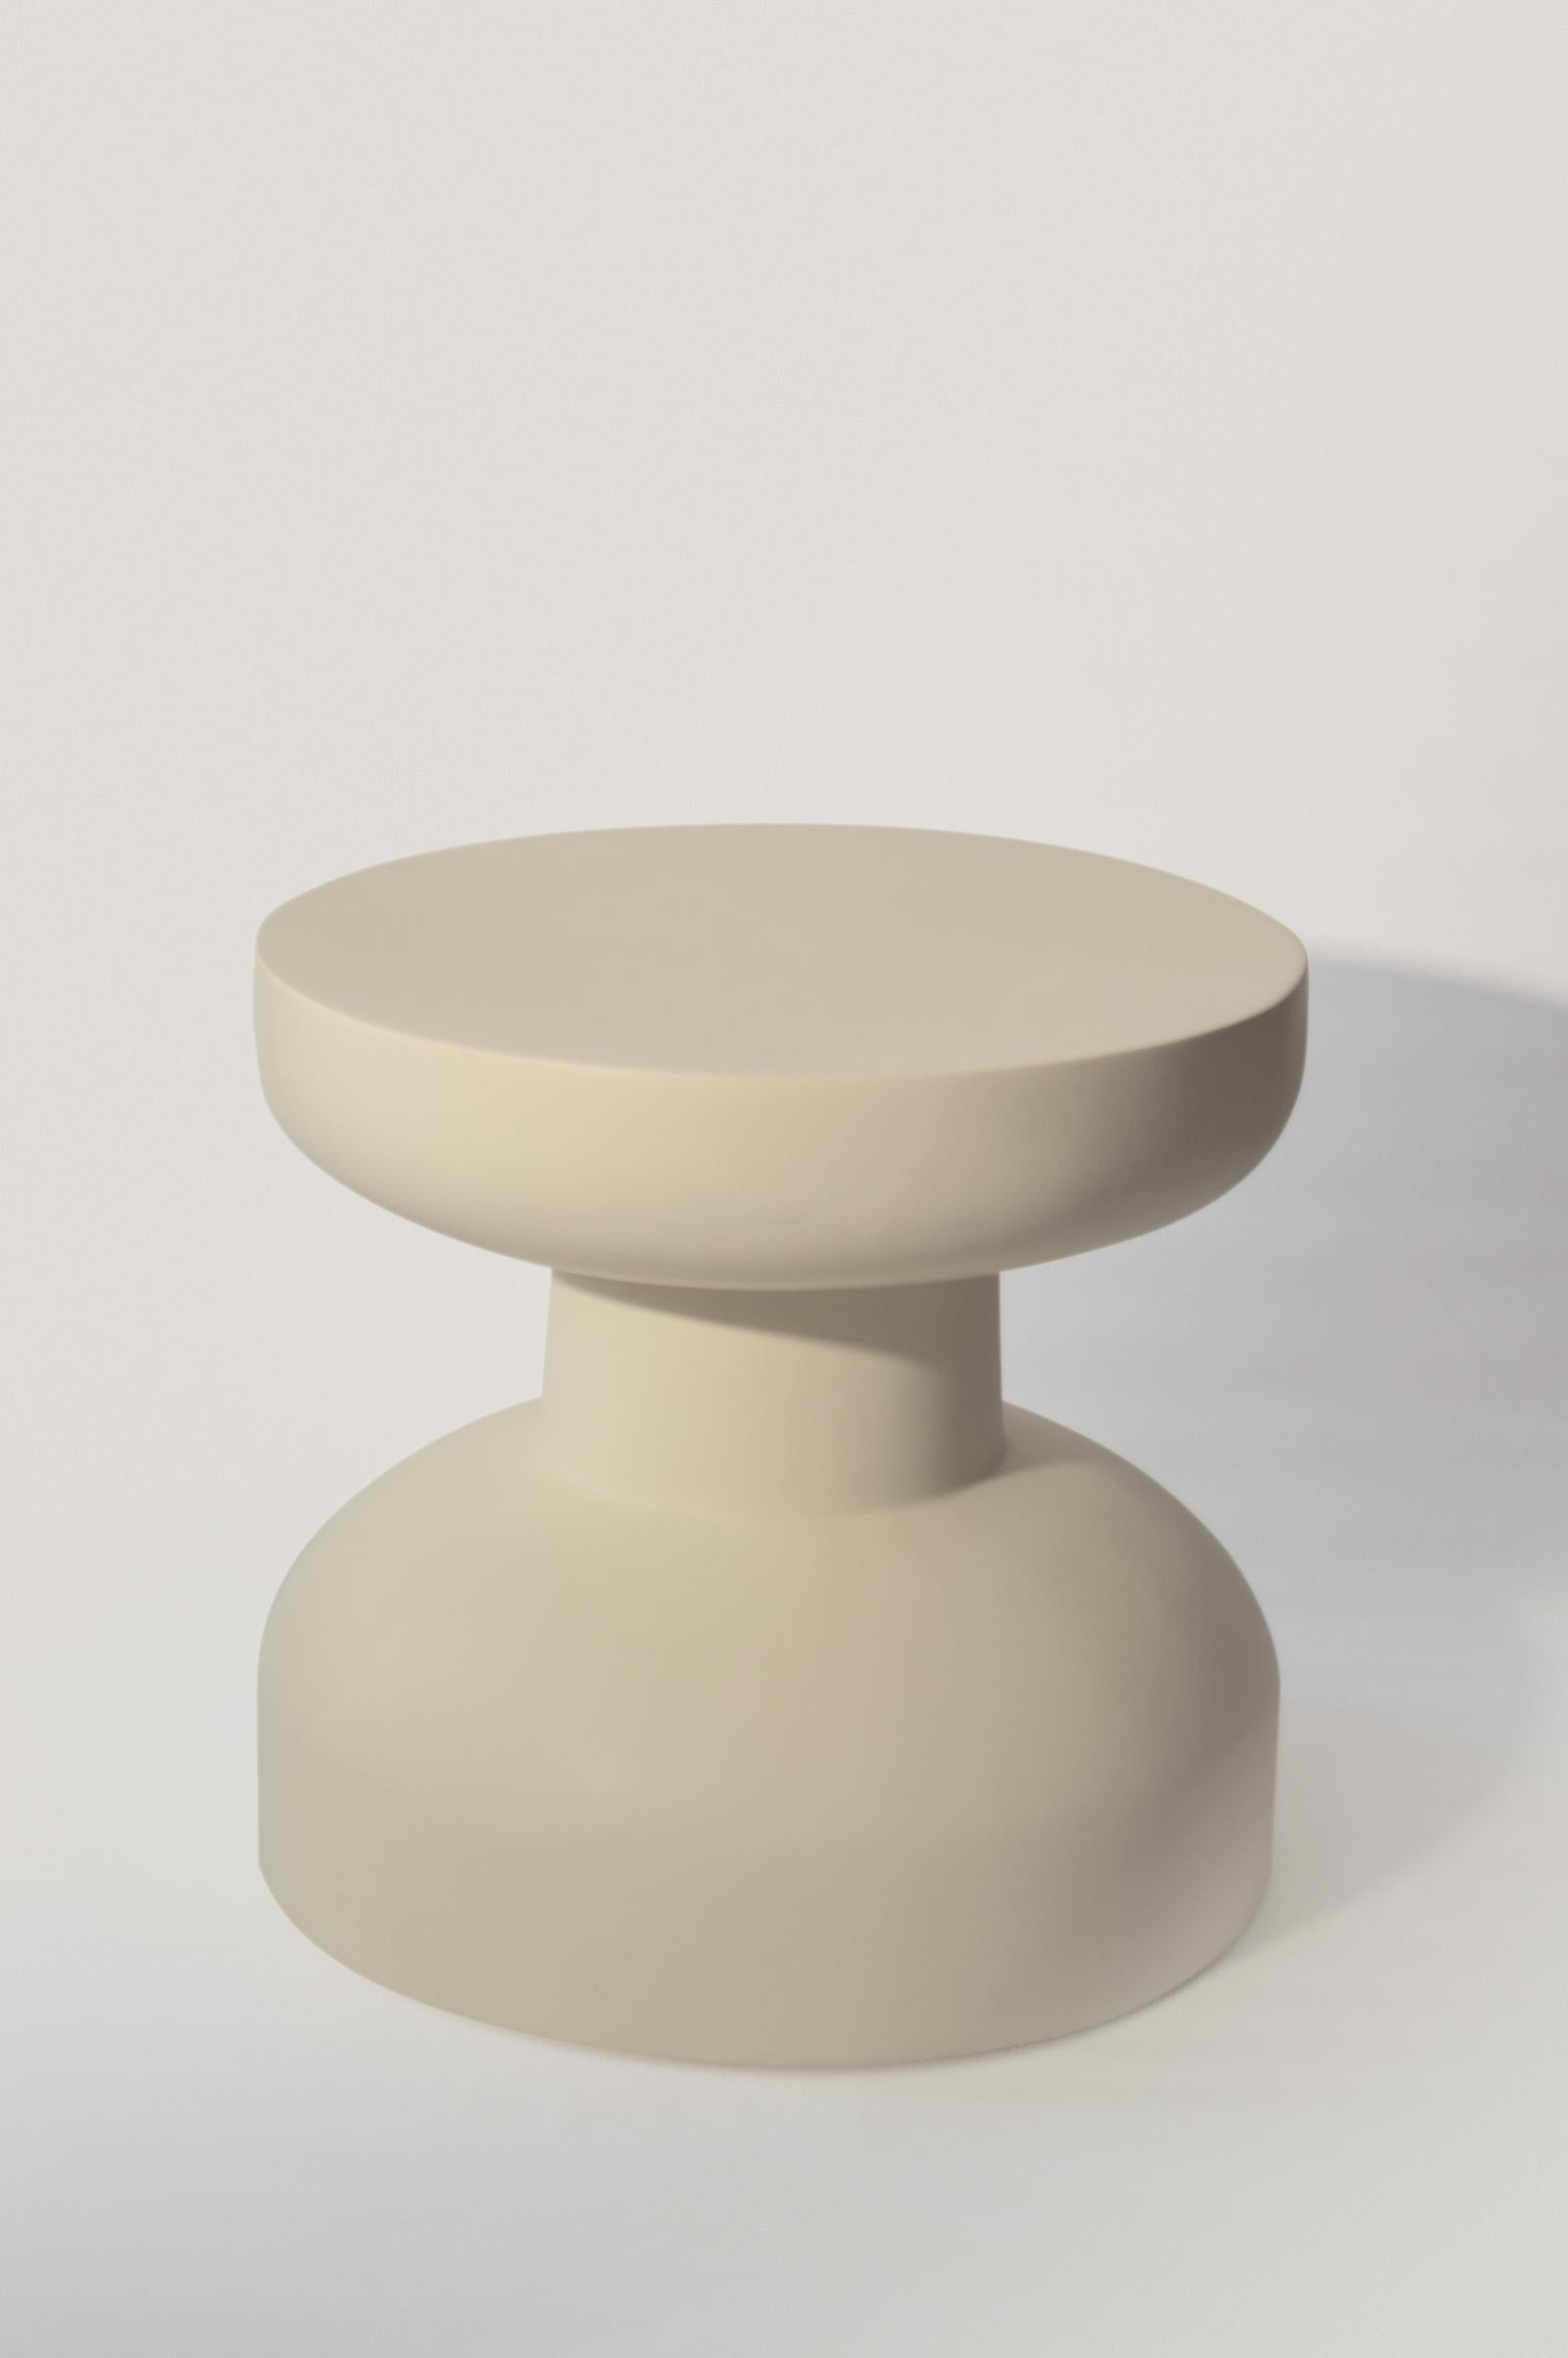 Calyx is a simple and sculptural resin side table. Material and shape combine to give it an interesting, soft yet robust appearance, ideal both for interiors and exteriors, as an occasional or bedside table.

Every piece is hand-cast and moulded,